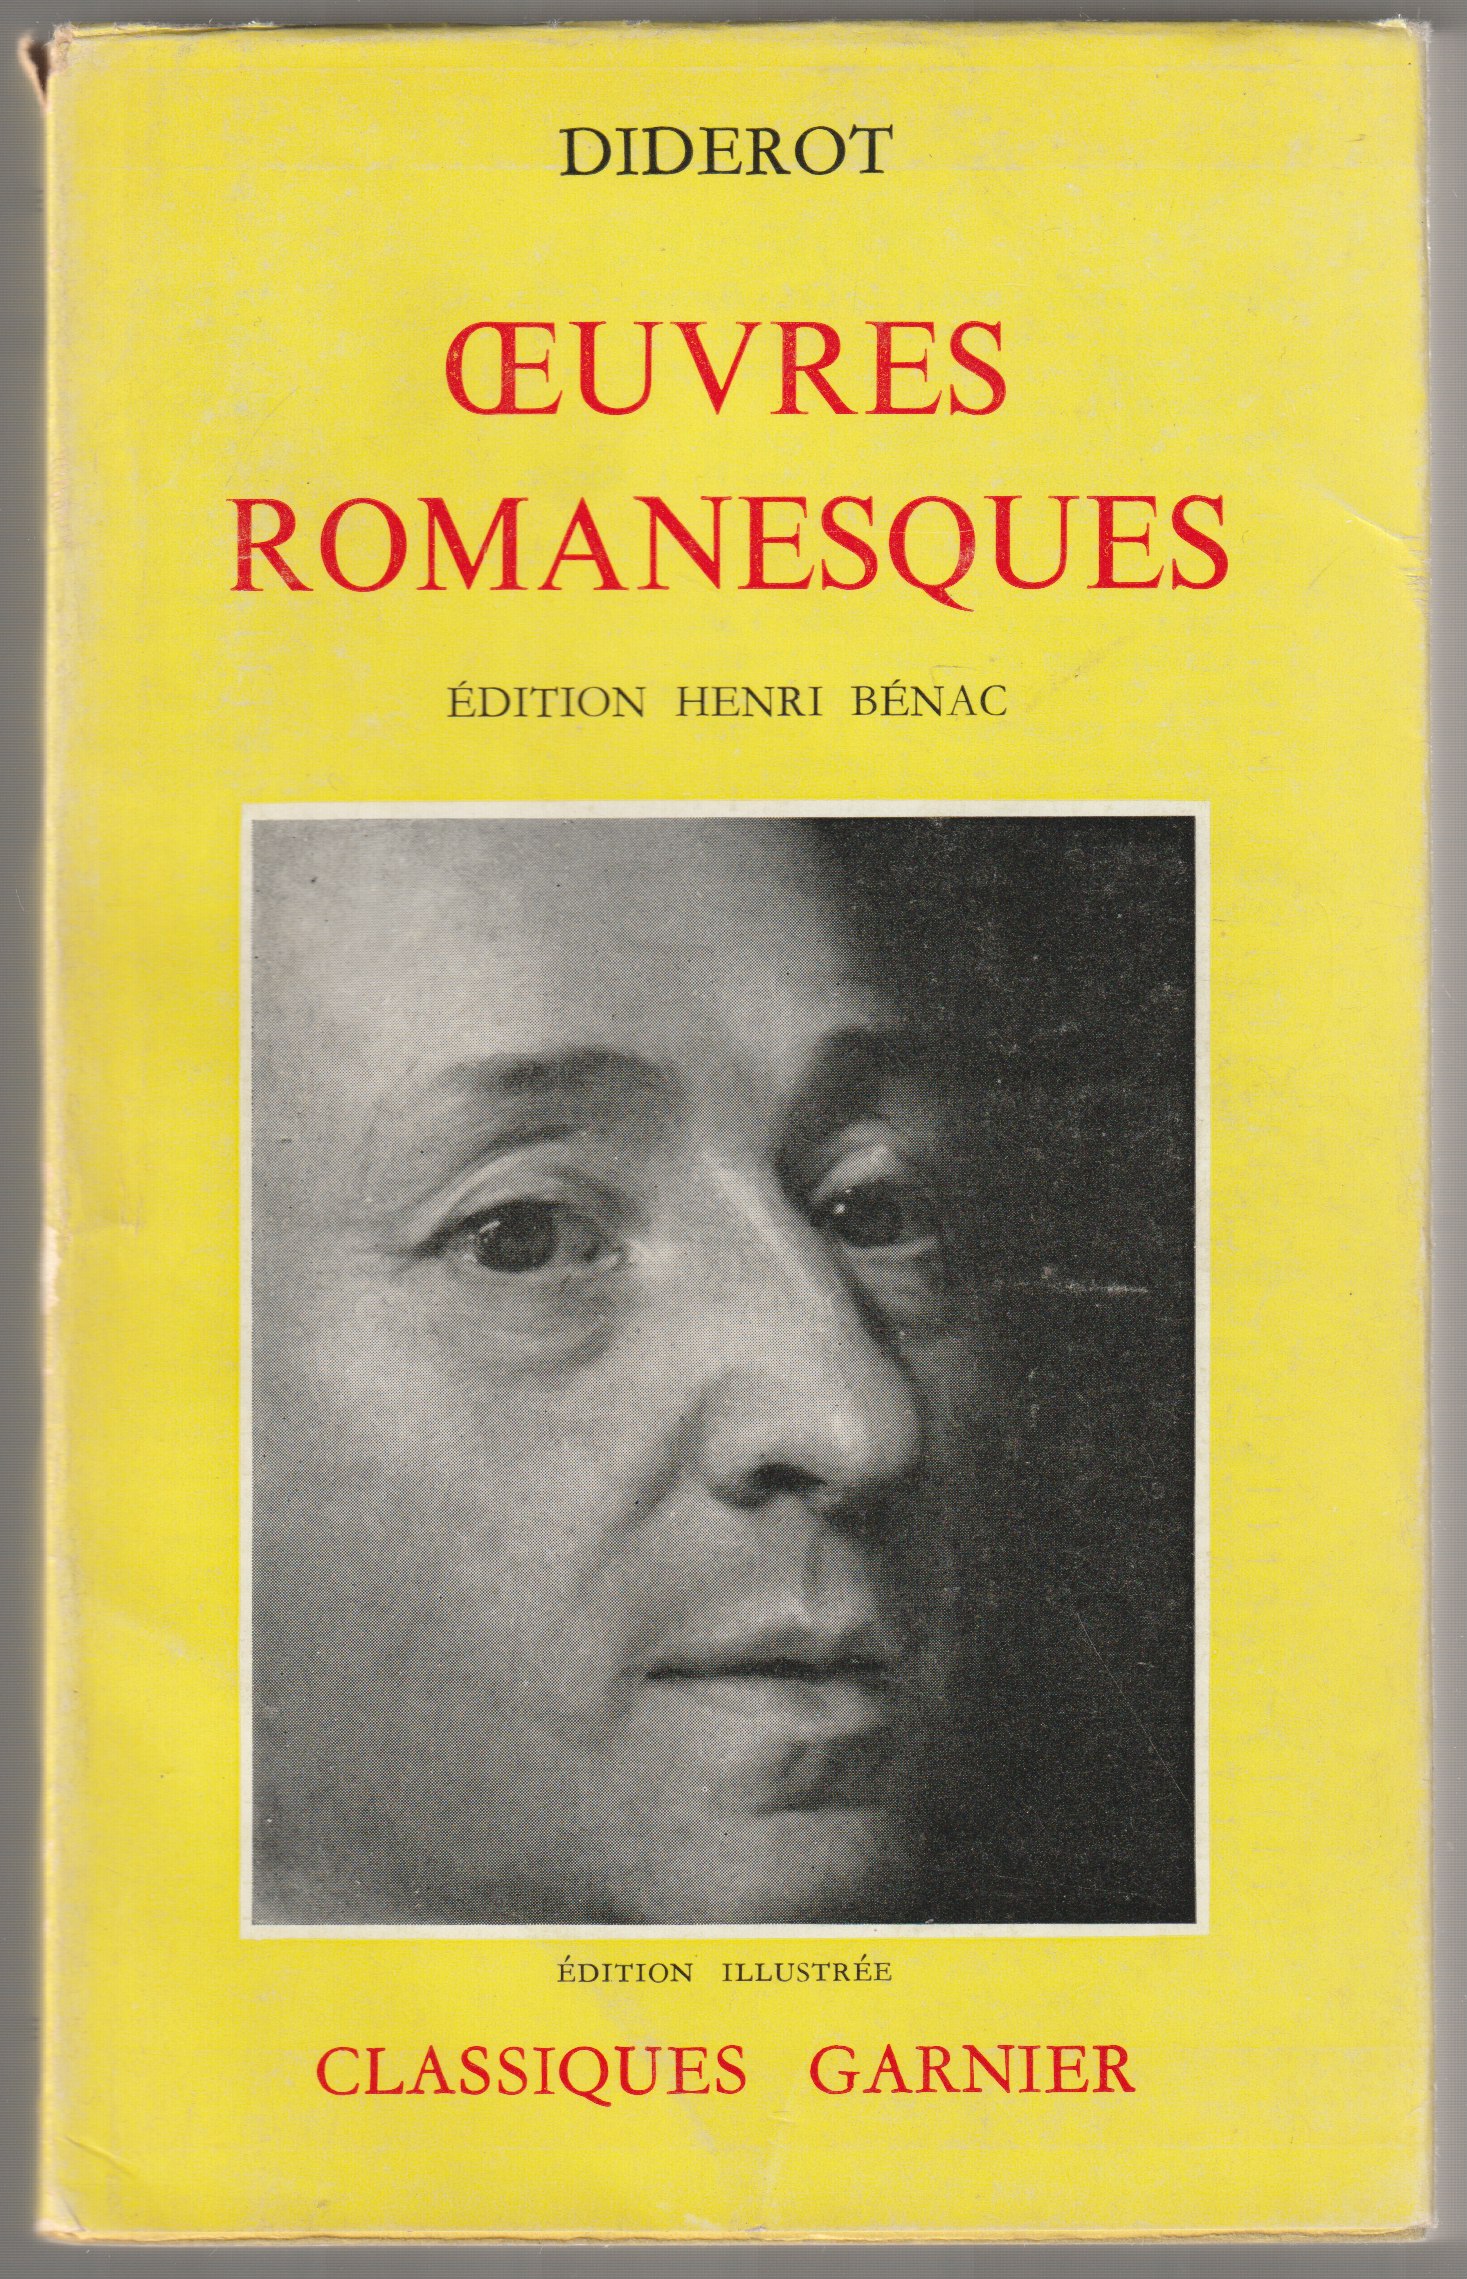 OEuvres romanesques.